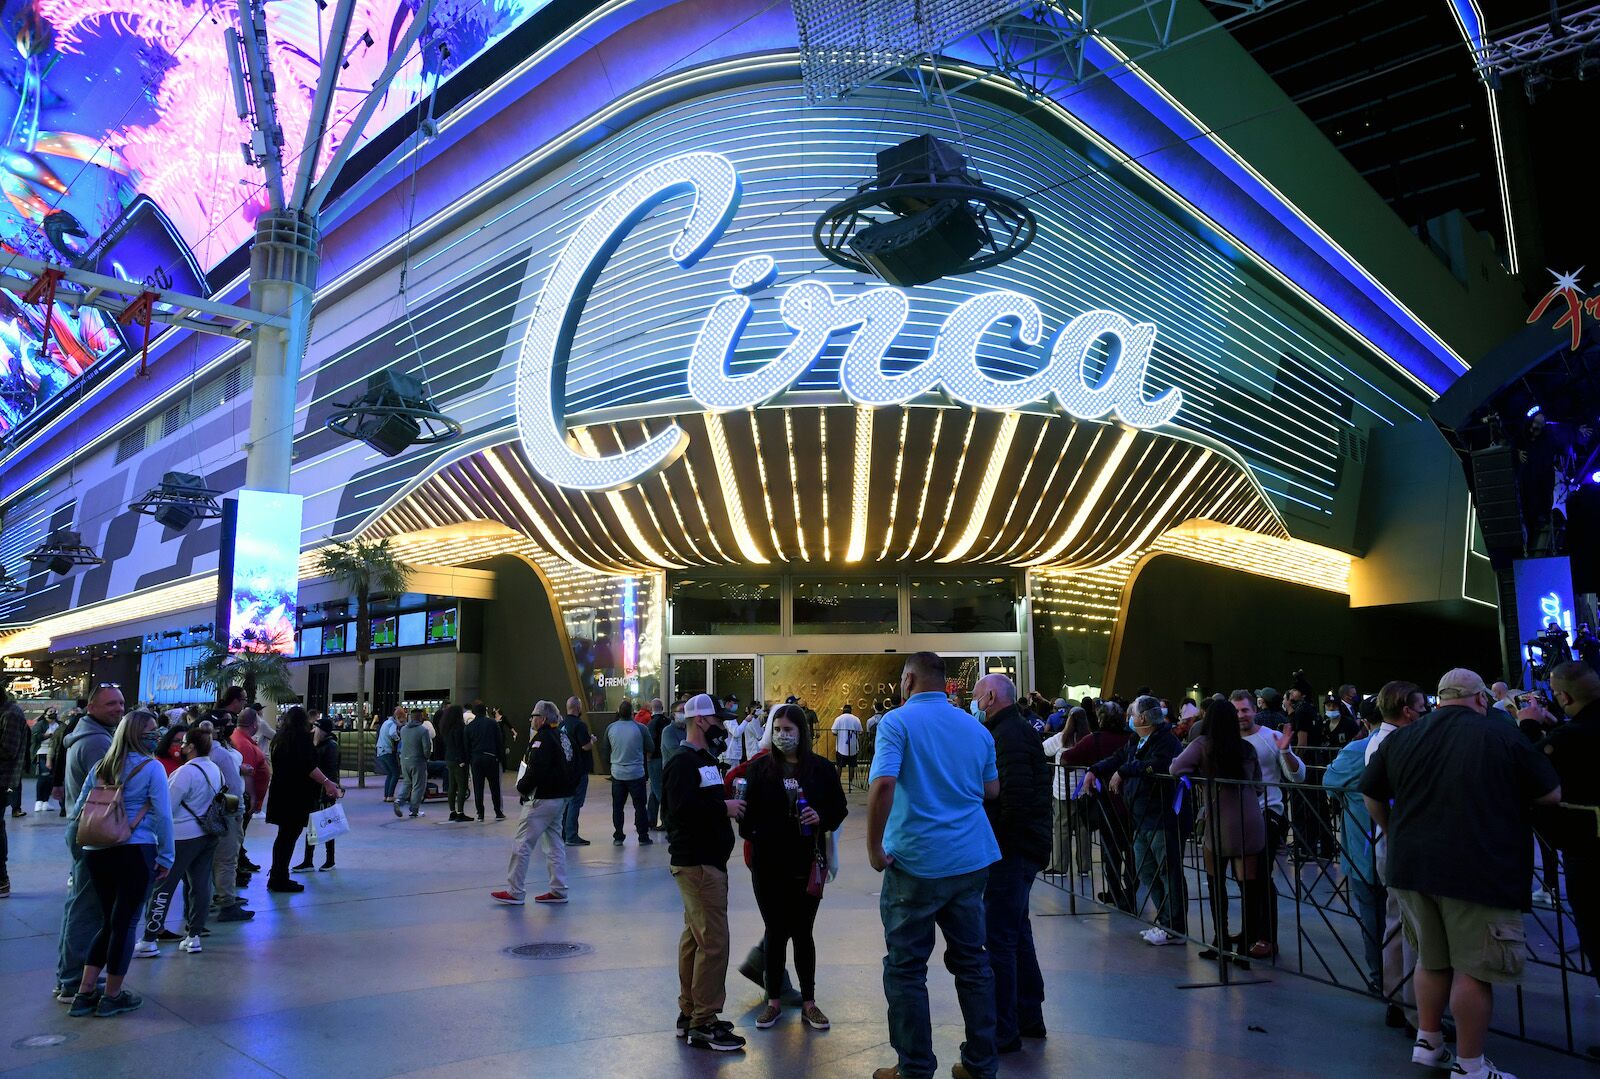 LAS VEGAS, NEVADA - OCTOBER 27: Guests stand in line at the Fremont Street Experience as they wait to enter Circa Resort & Casino during the property's grand opening on October 27, 2020 in Las Vegas, Nevada. (Photo by Ethan Miller/Getty Images for Circa Resort & Casino)